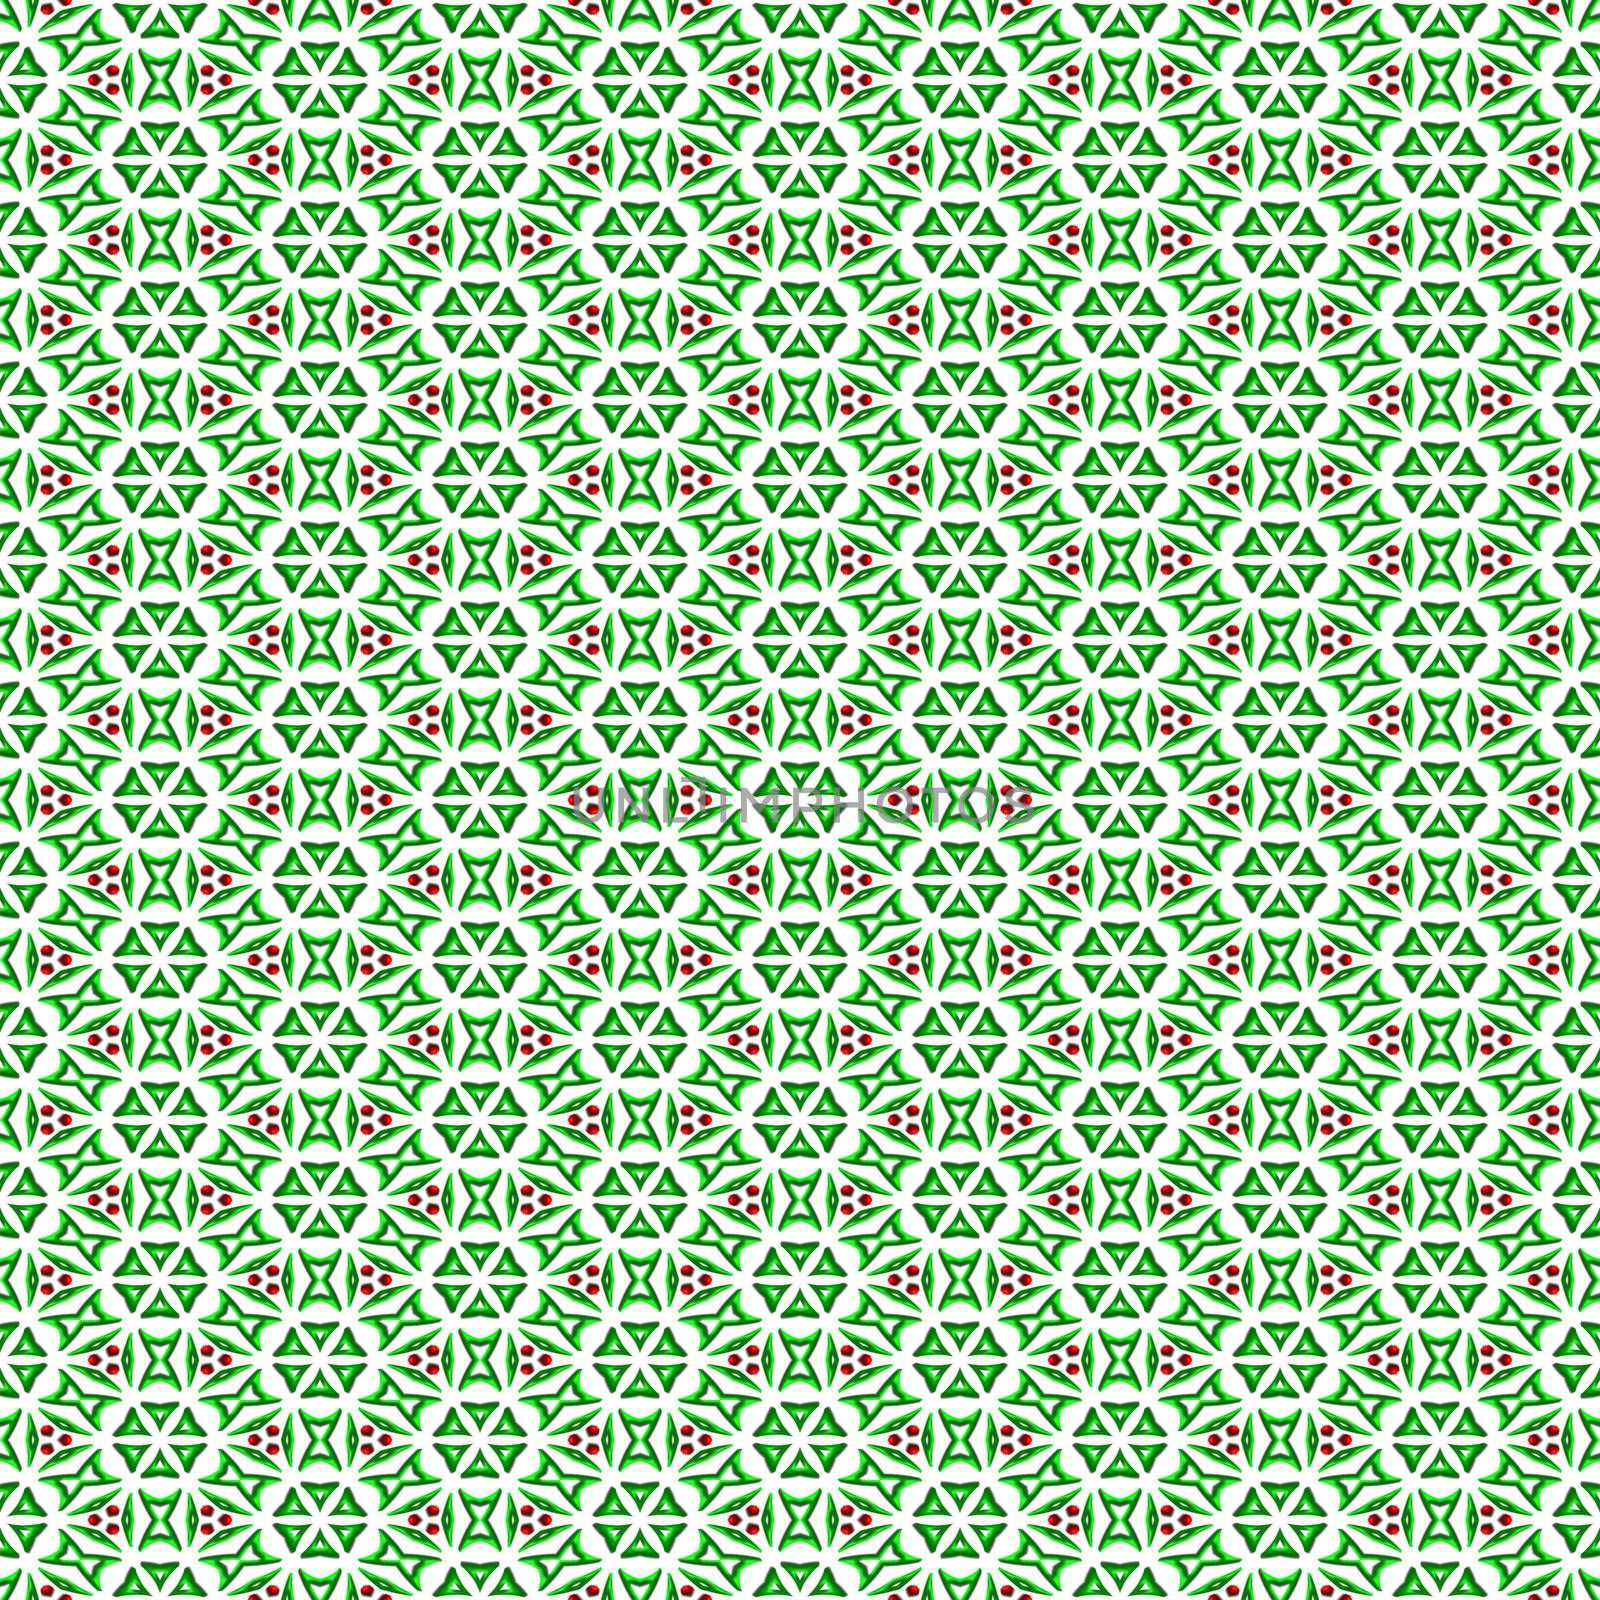 seamless background with festive green and red leaf shapes